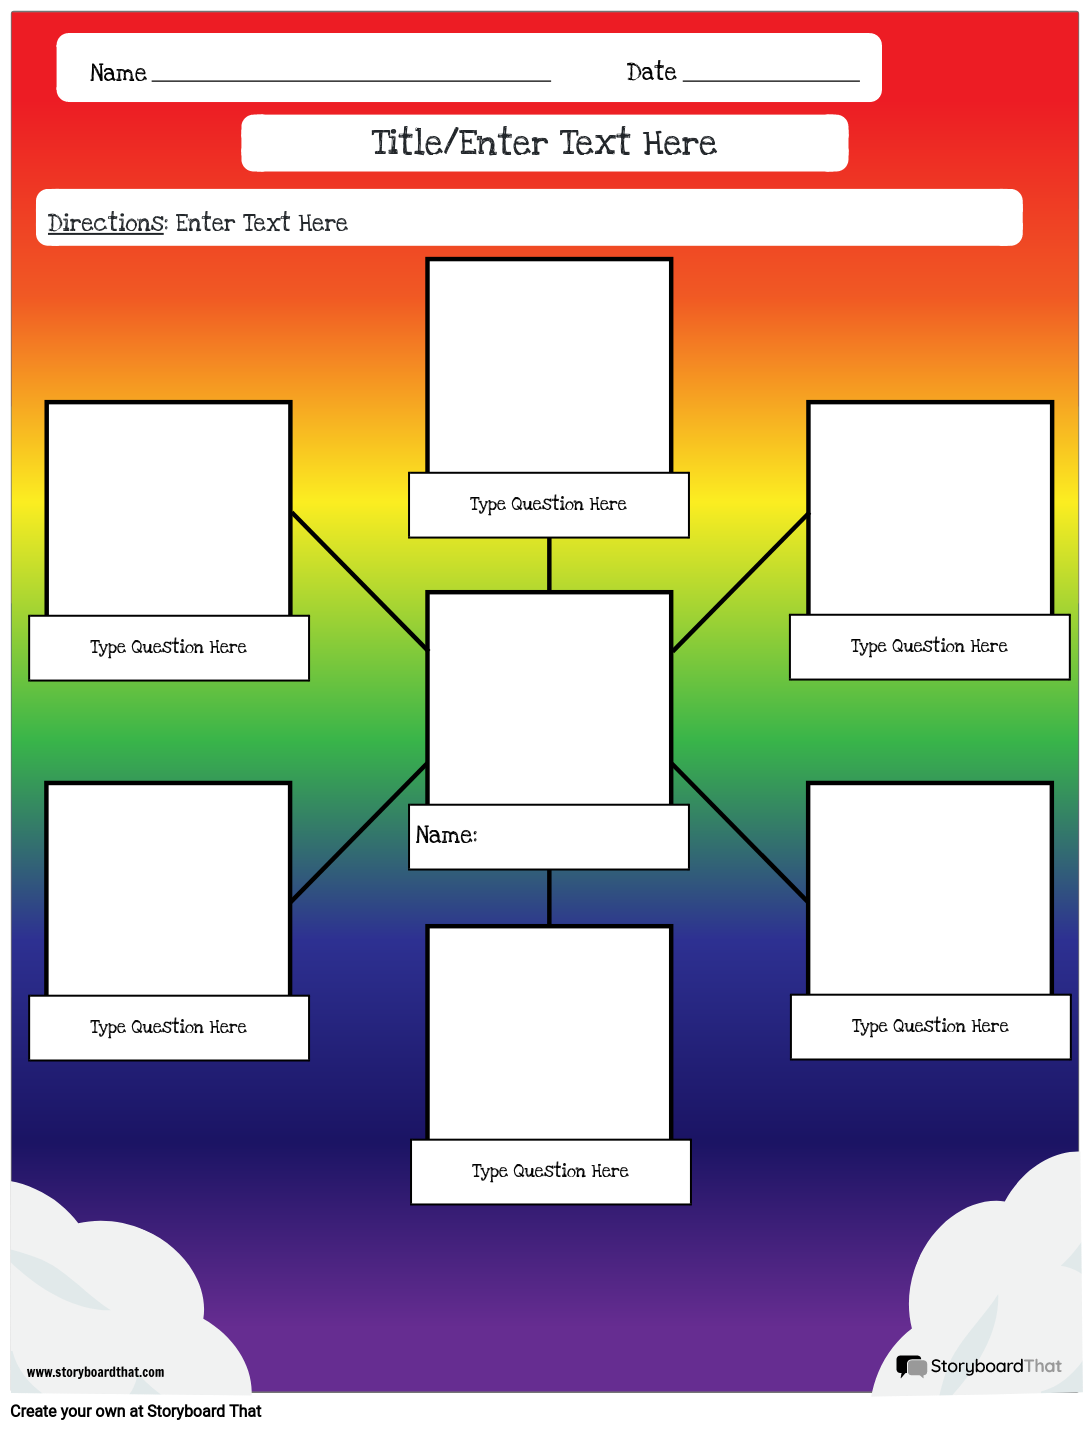 First Day Activities All About Me Spider Map with Rainbow Background